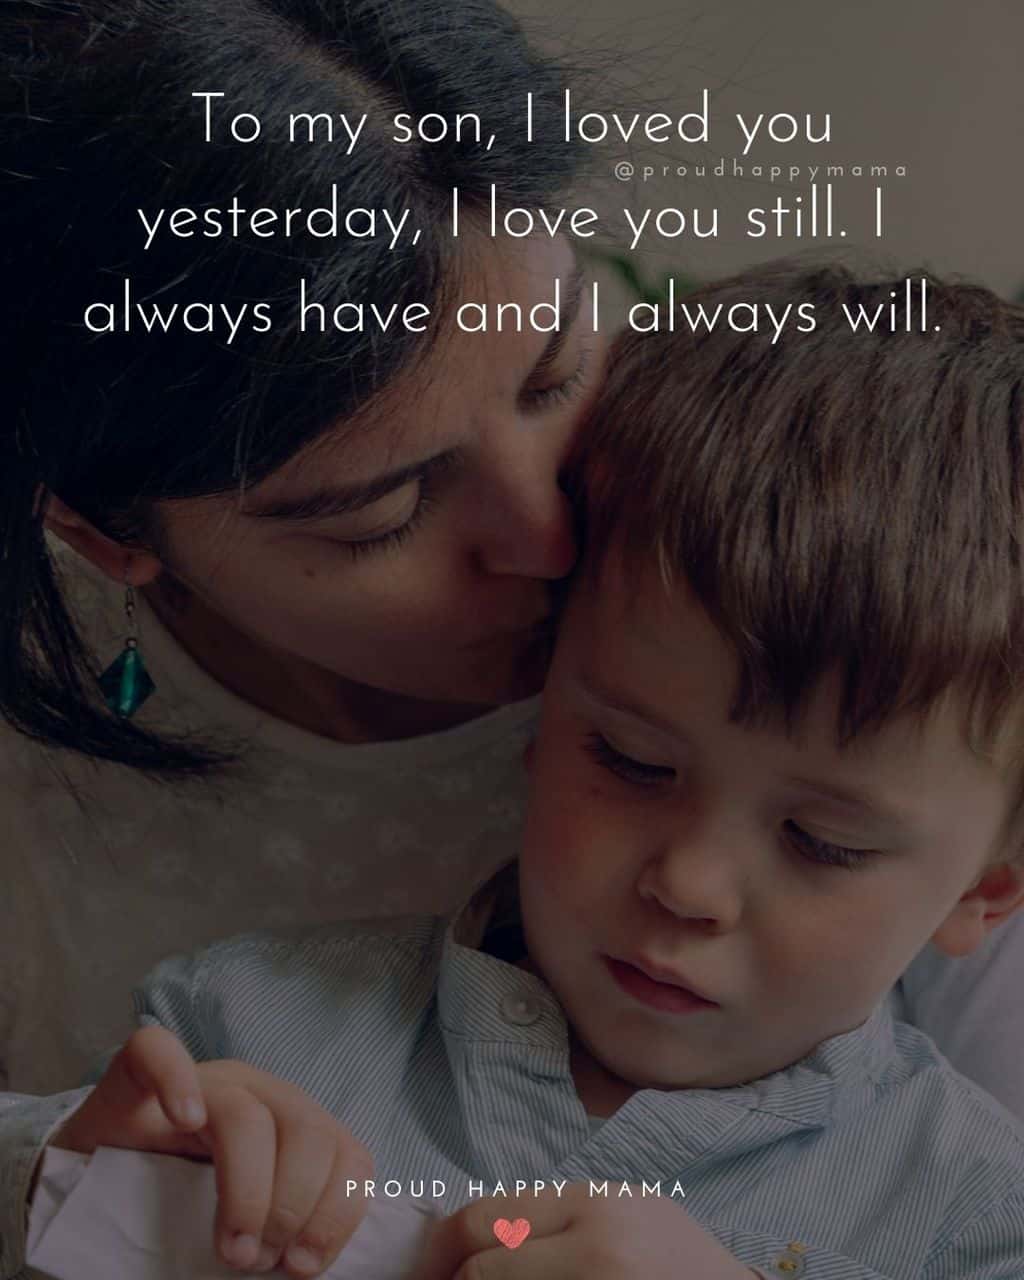 Son Quotes - To my son, I loved you yesterday, I love you still. I always have and I always will.’